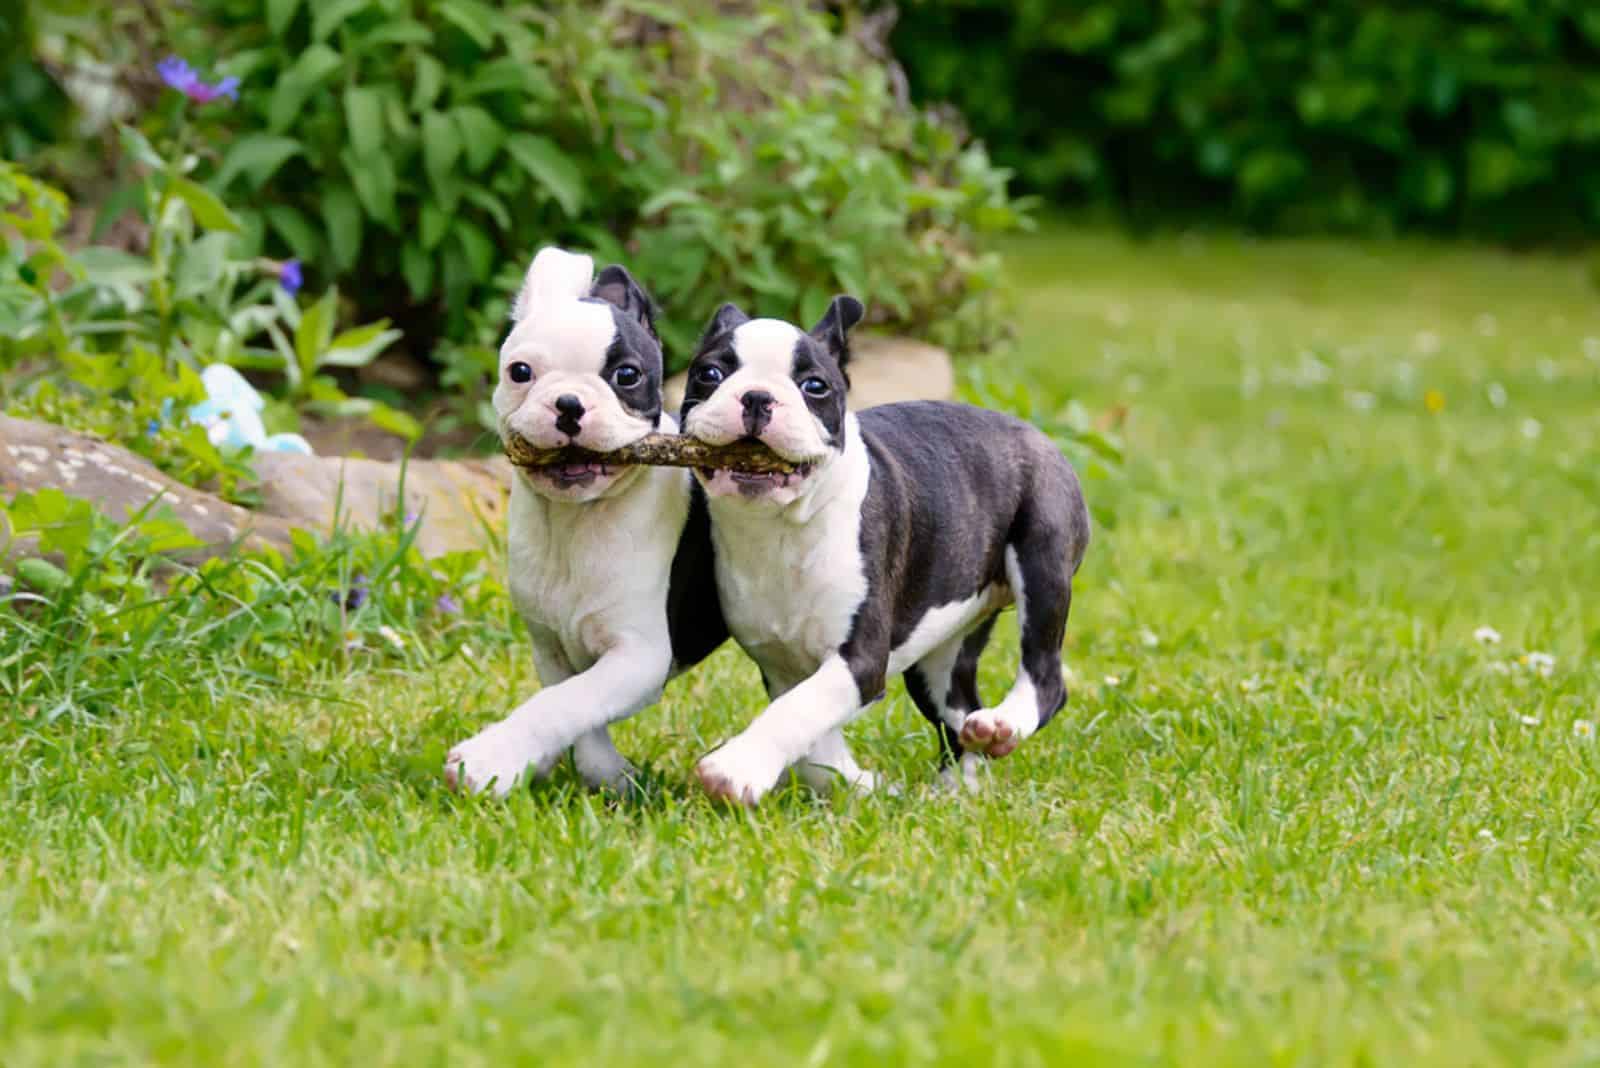 Two young Boston Terrier dogs carrying a stick together